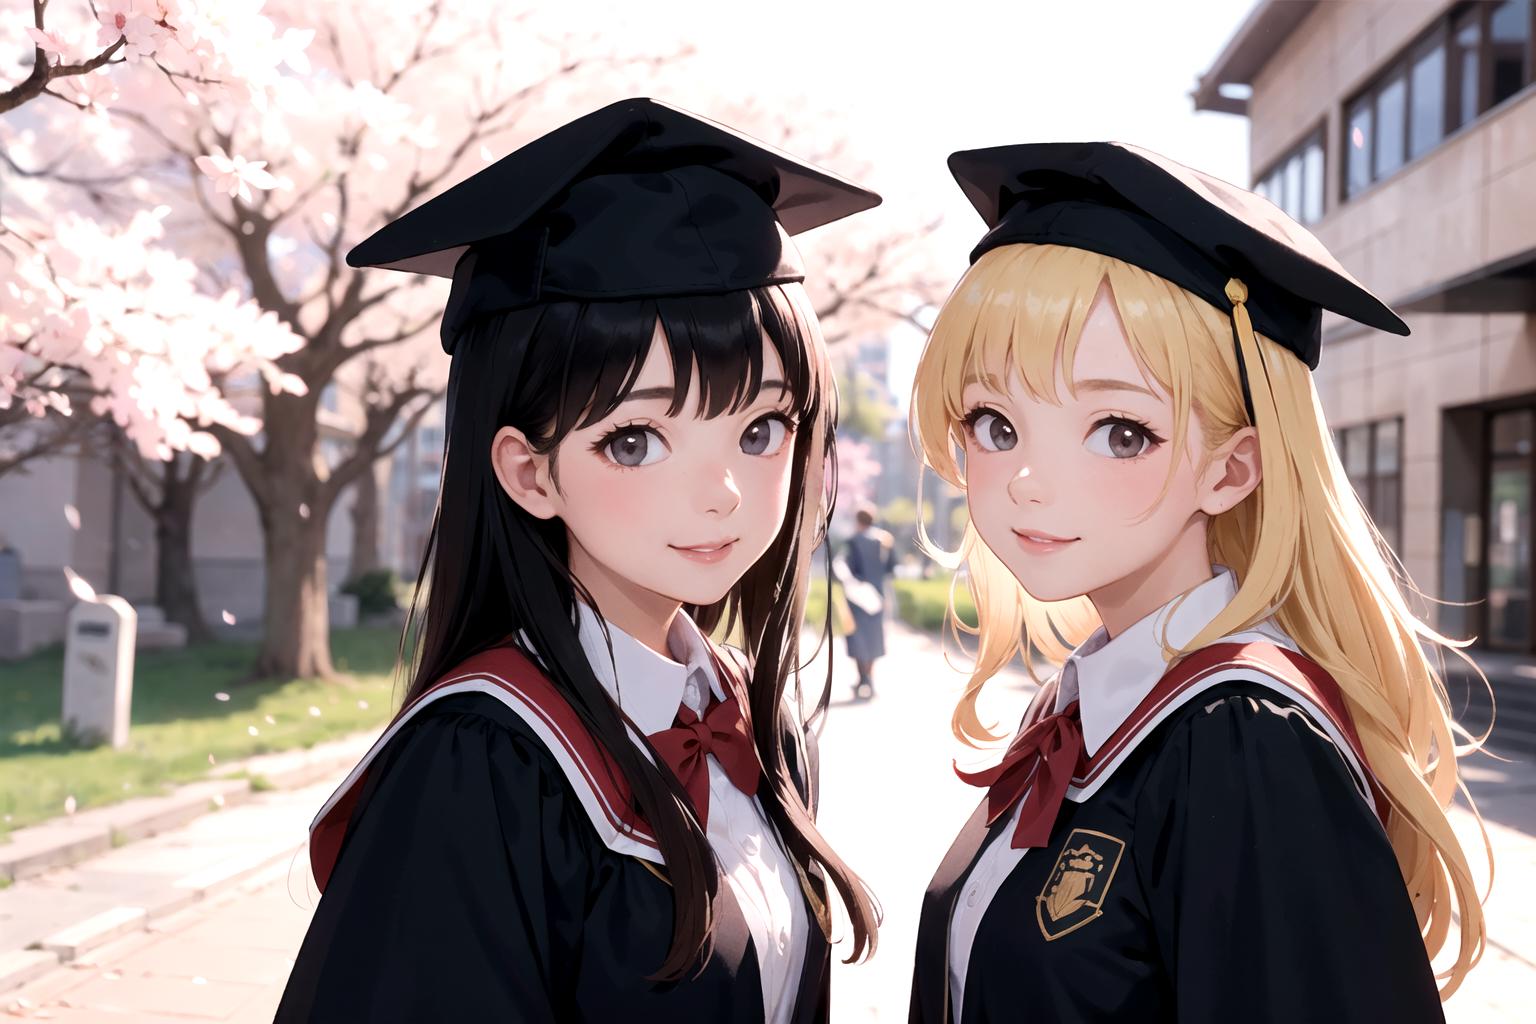 Two cartoon women wearing graduation caps and gowns.